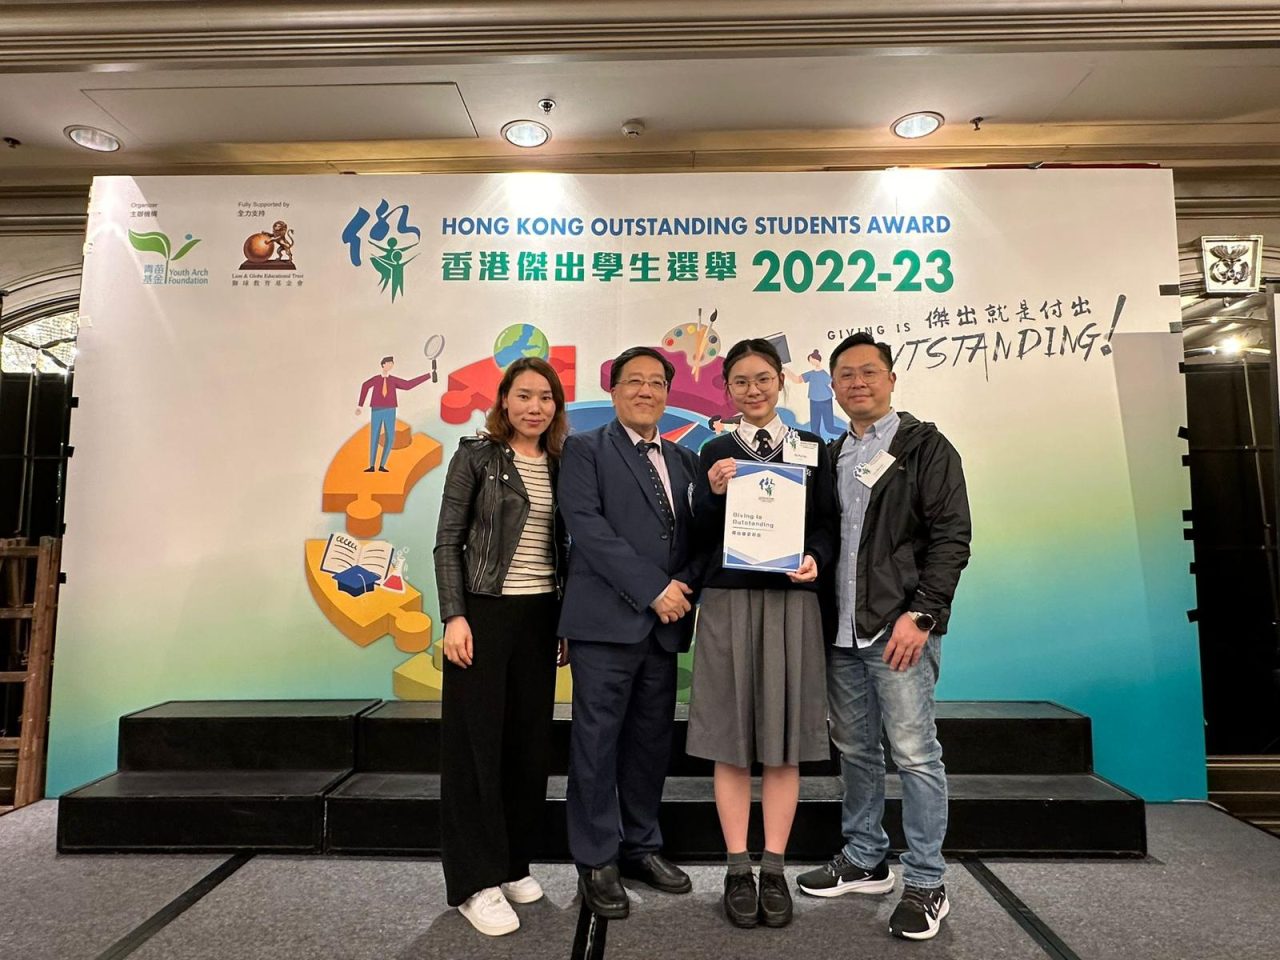 Finalist in the Hong Kong Outstanding Students Award 2022-23